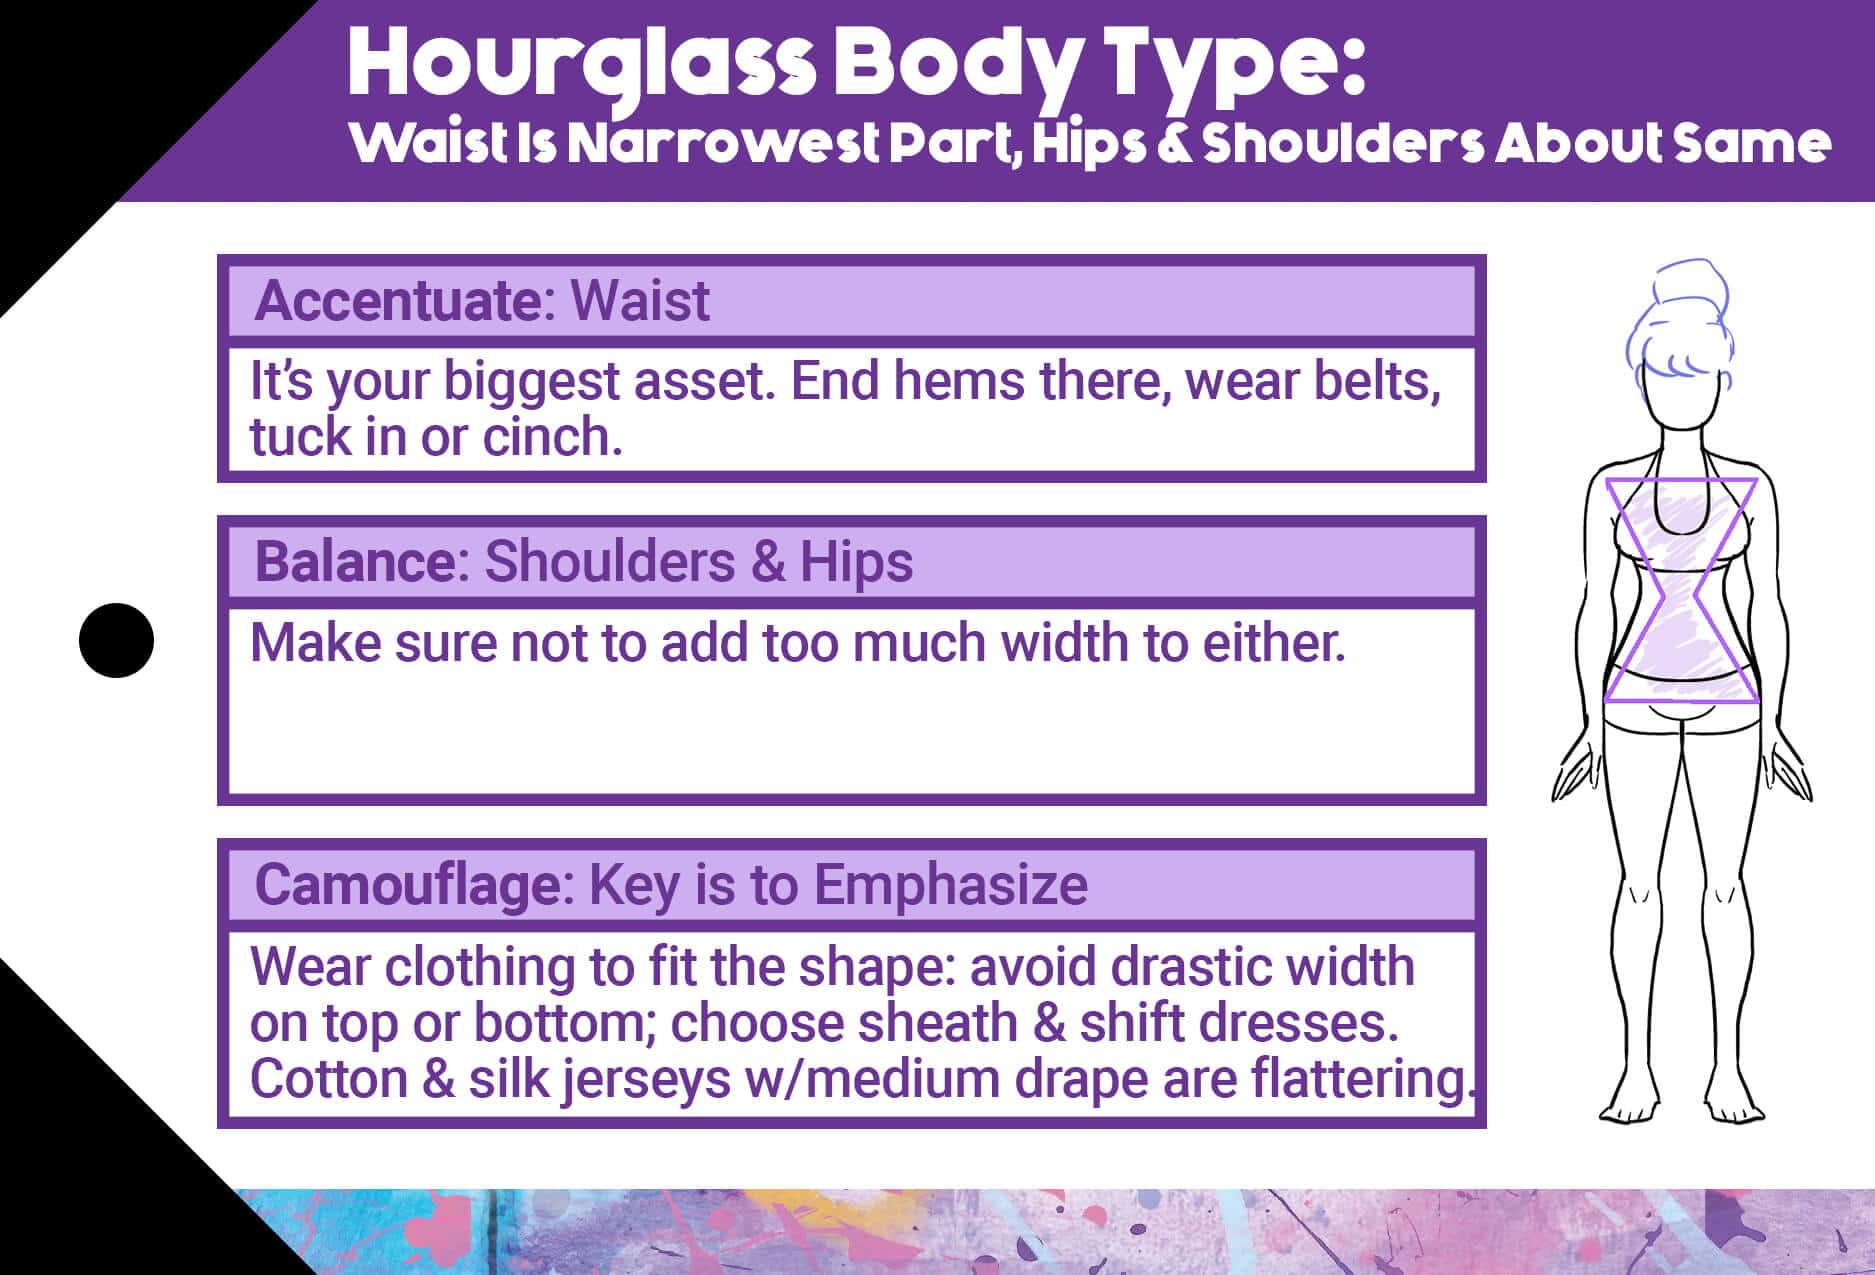 Hourglass Body Type Styling Suggestions